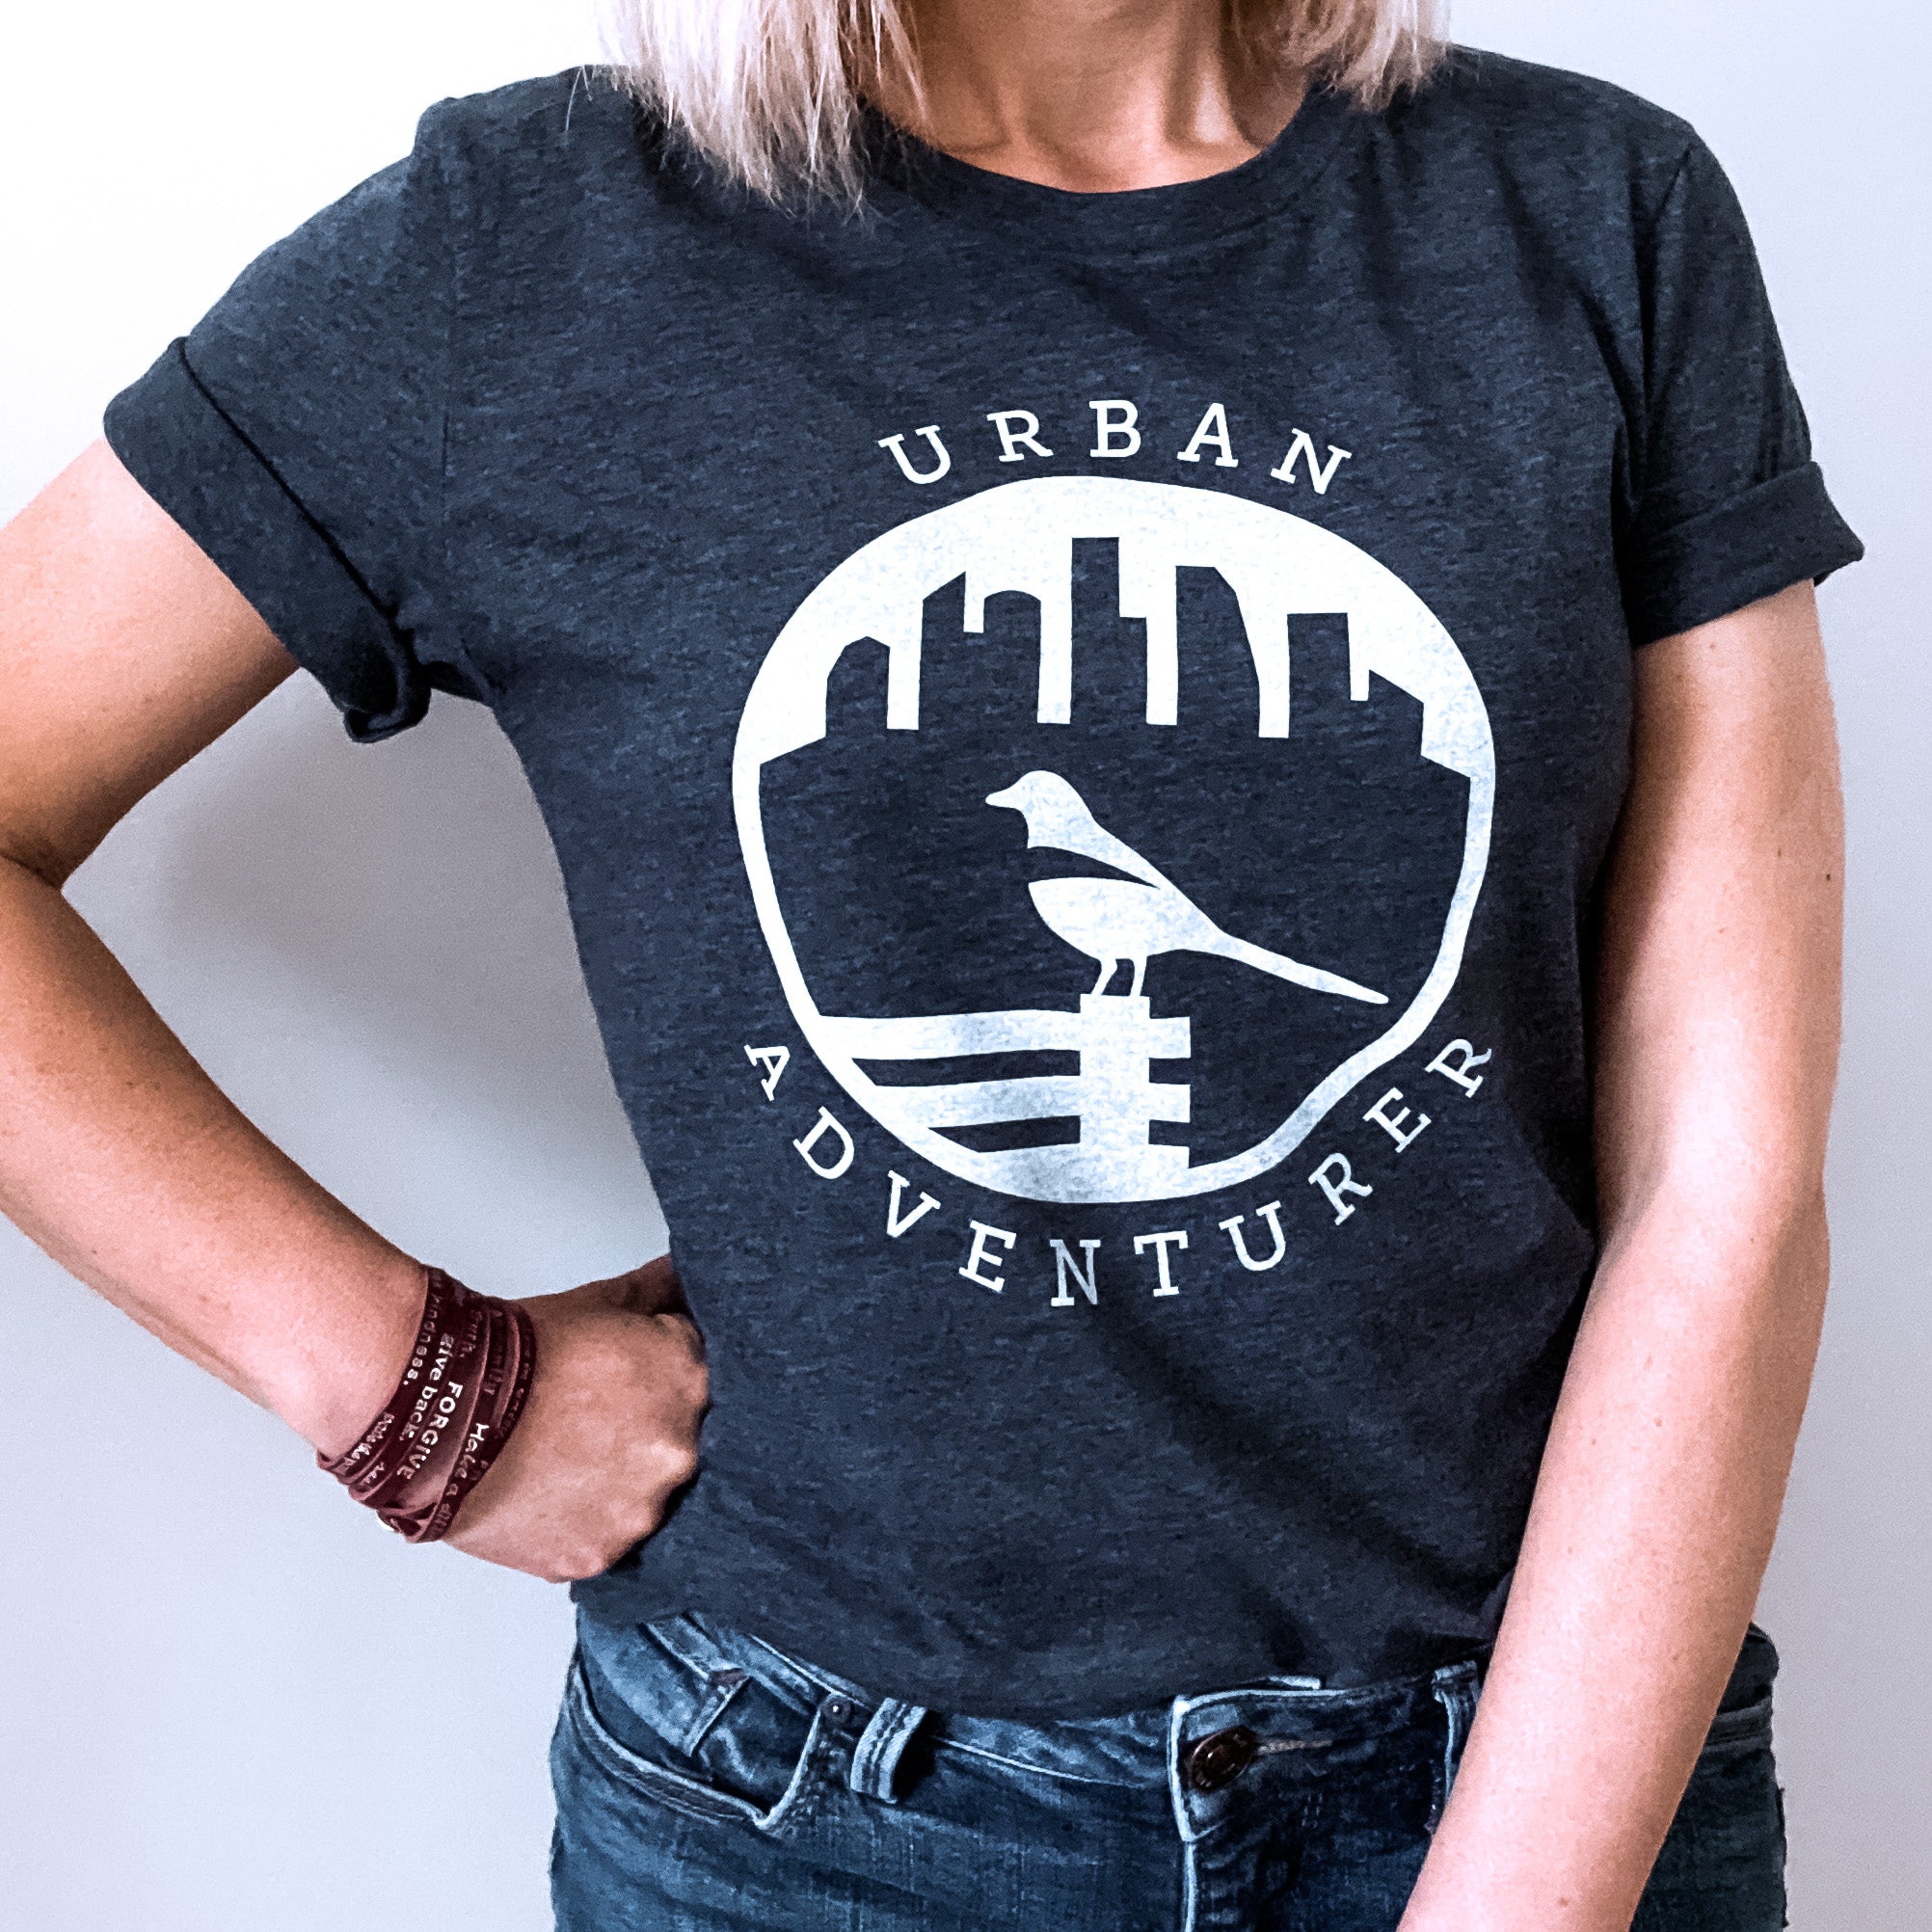 This navy heather t-shirt contains a white silhouette of a magpie perched on a park bench.  In the background is a city skyline.